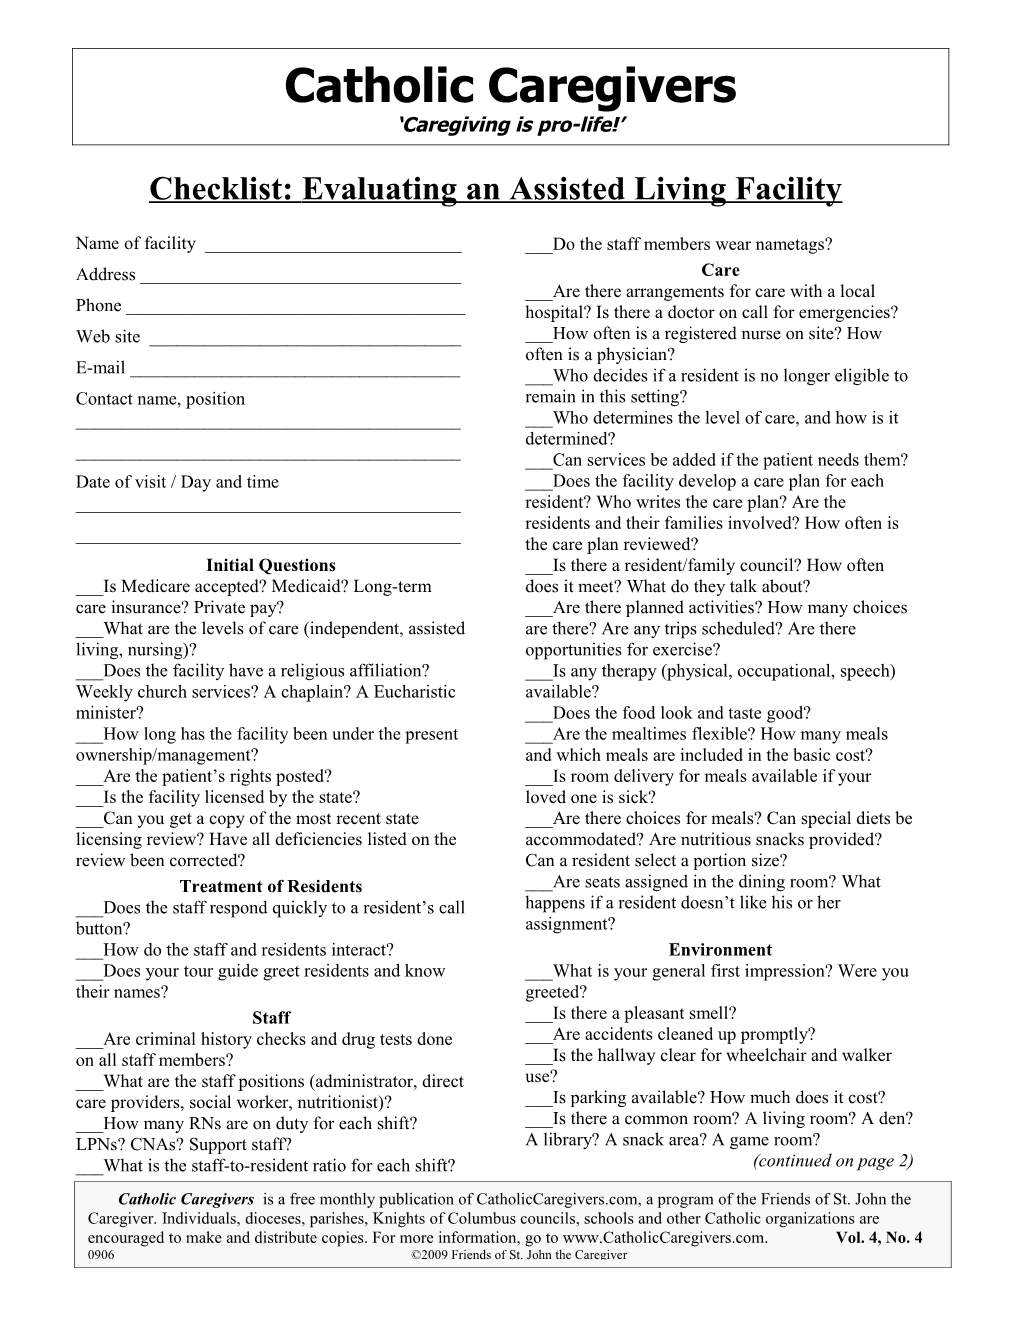 Checklist: Evaluating an Assistedliving Facility